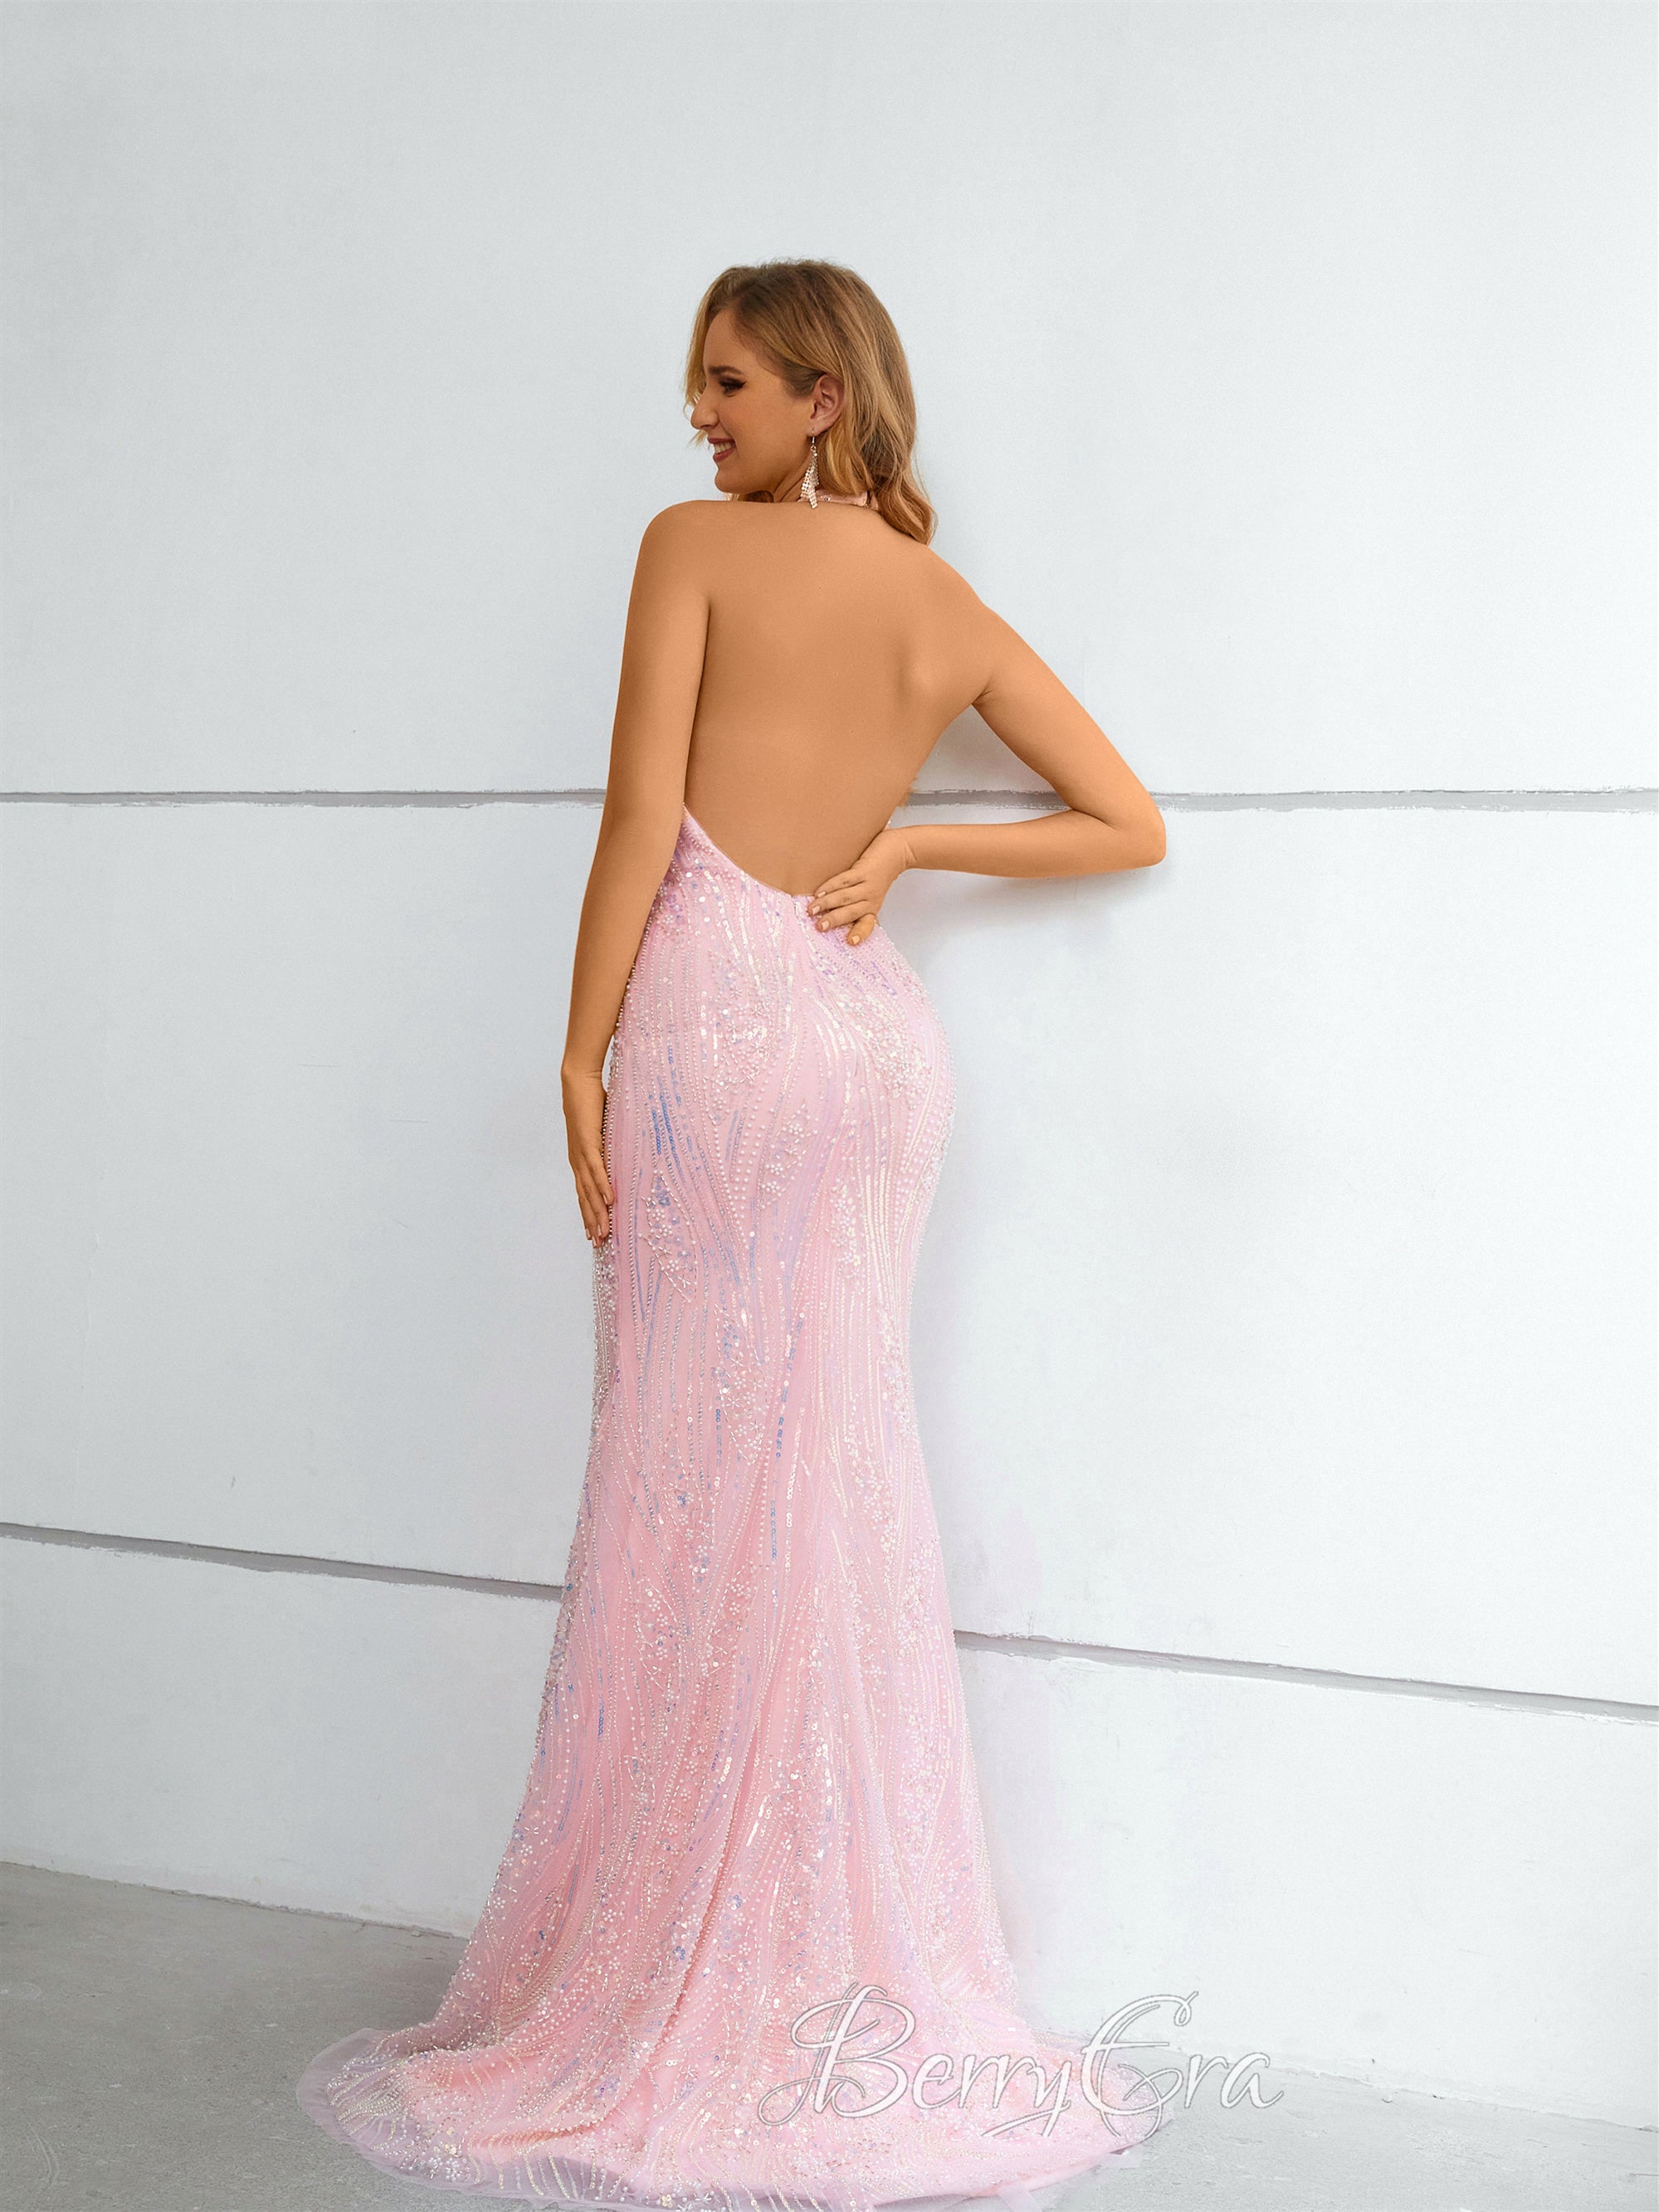 Halter Sequin Lace Mermaid Prom Dresses, Pink Prom Dresses, Affordable Prom Dresses, 2023 Prom Dresses